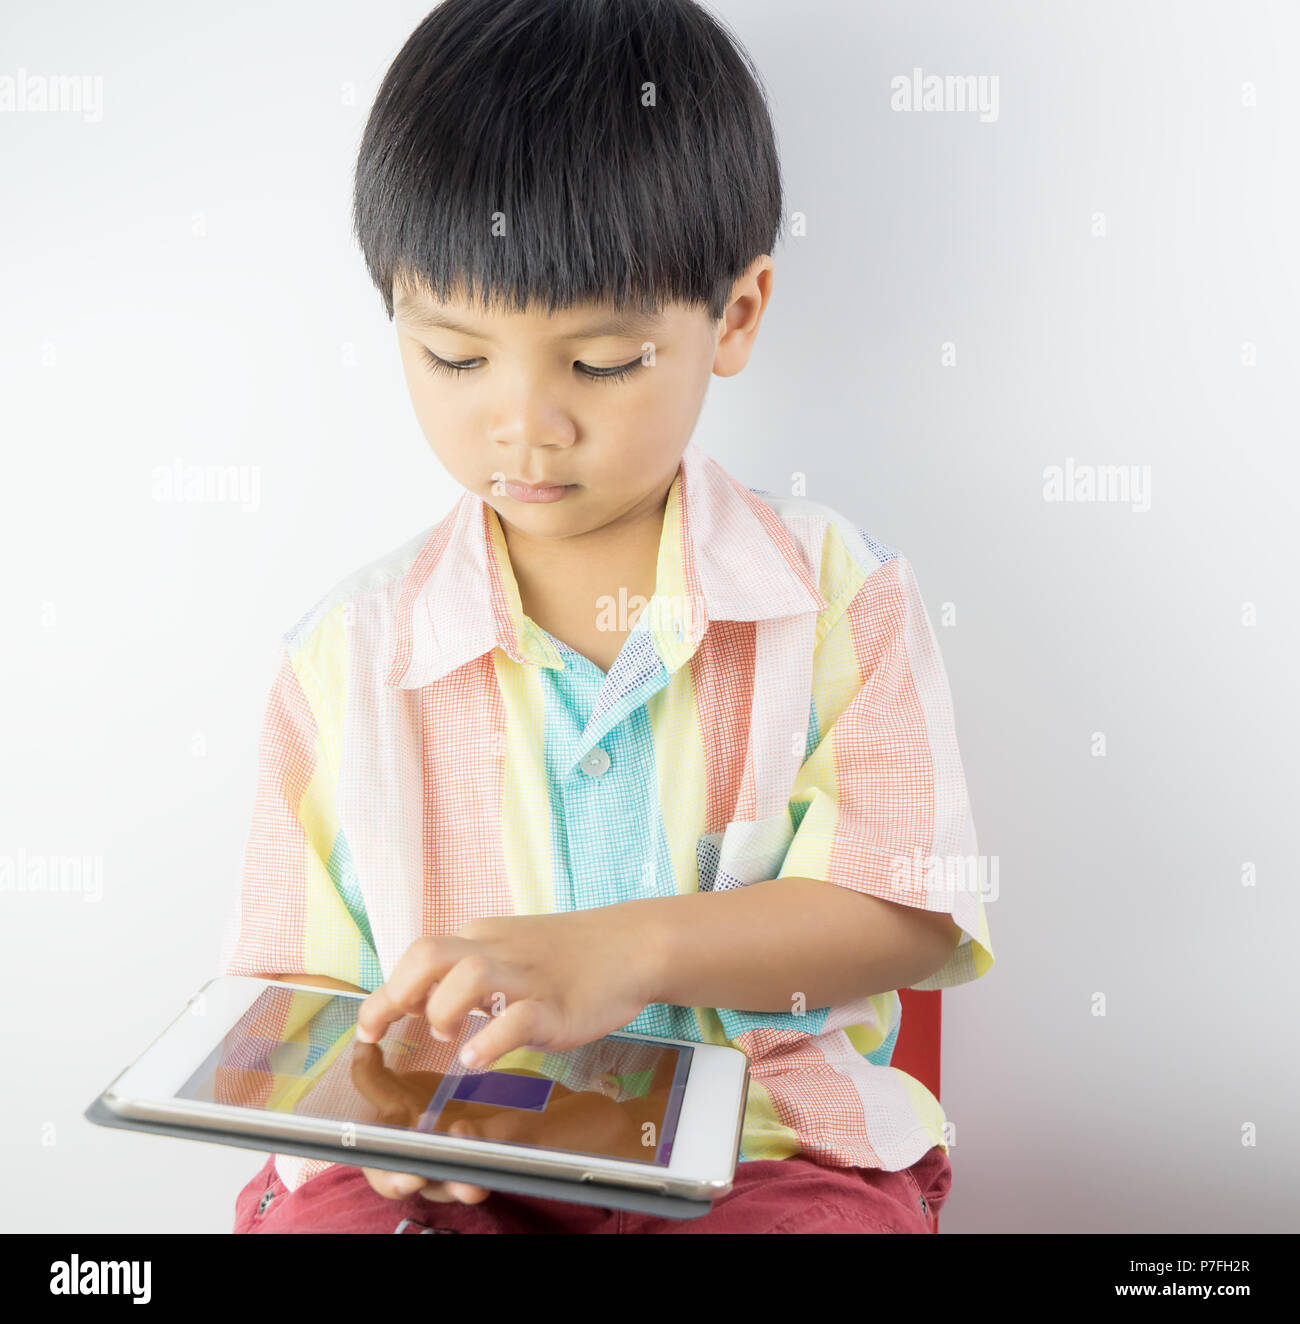 Asian boy is using finger to touch Tablet screen. Stock Photo